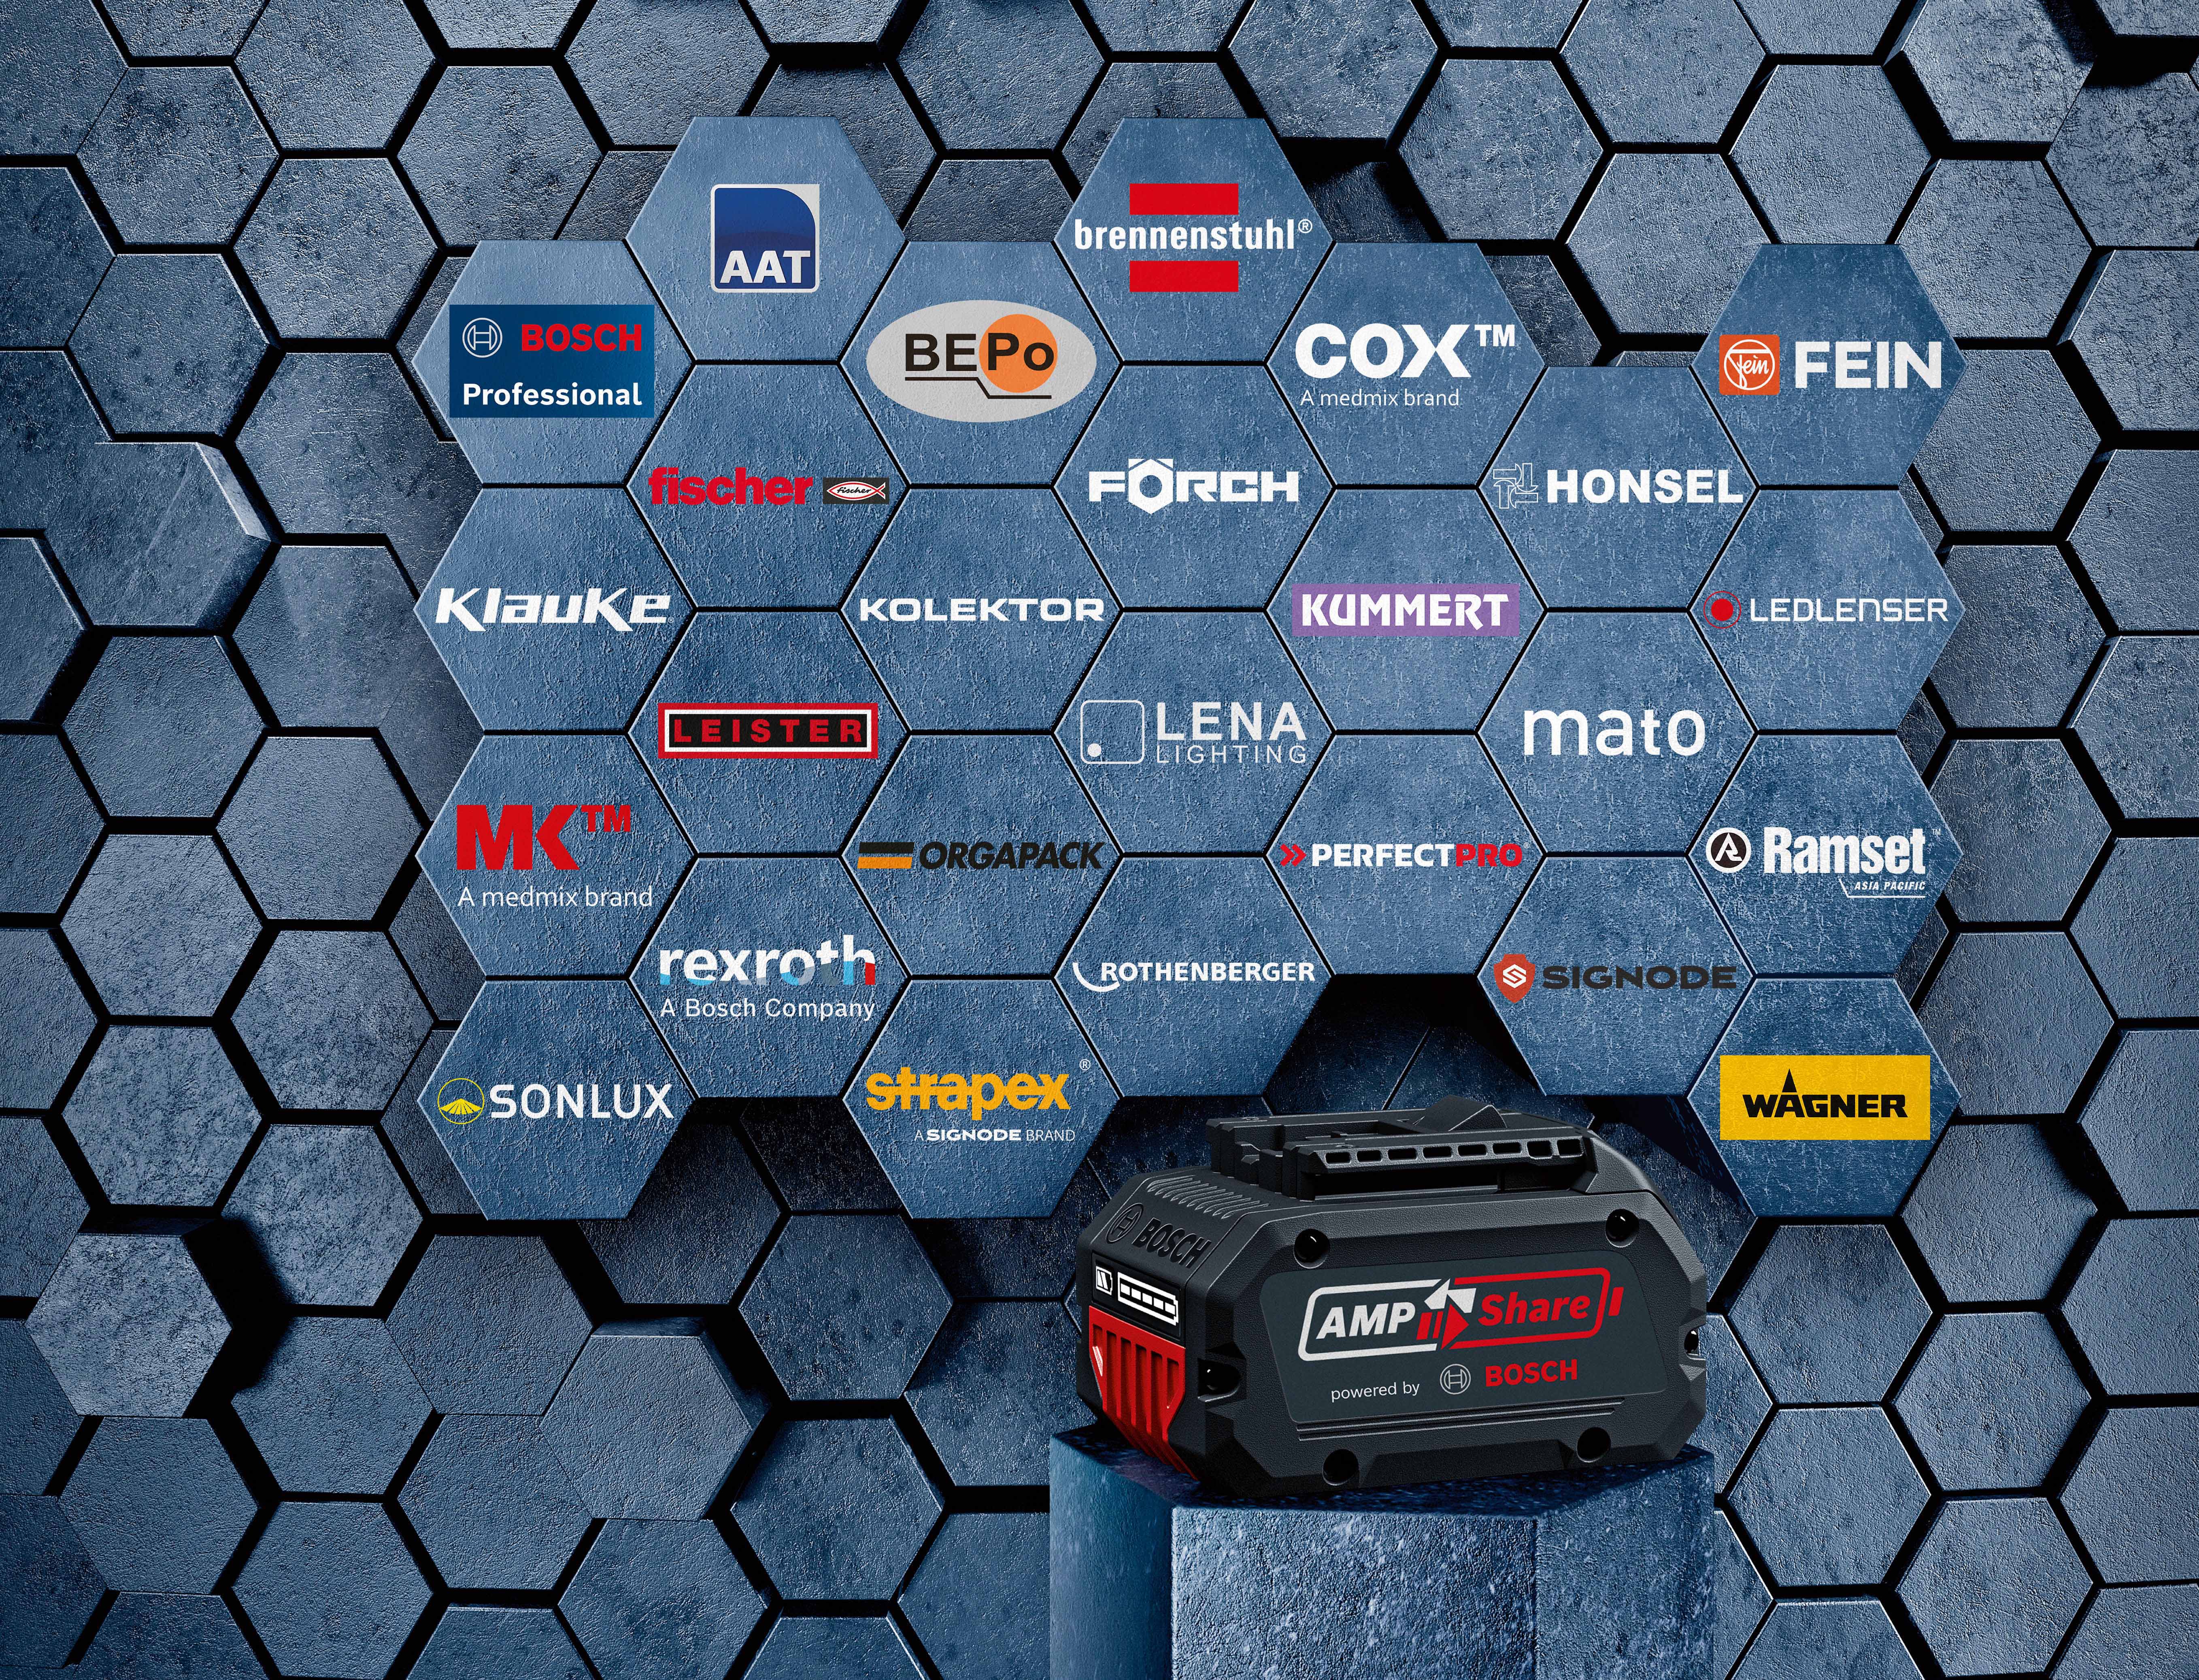 Battery system for pros expands to more than 25 brands: AmpShare powered by Bosch